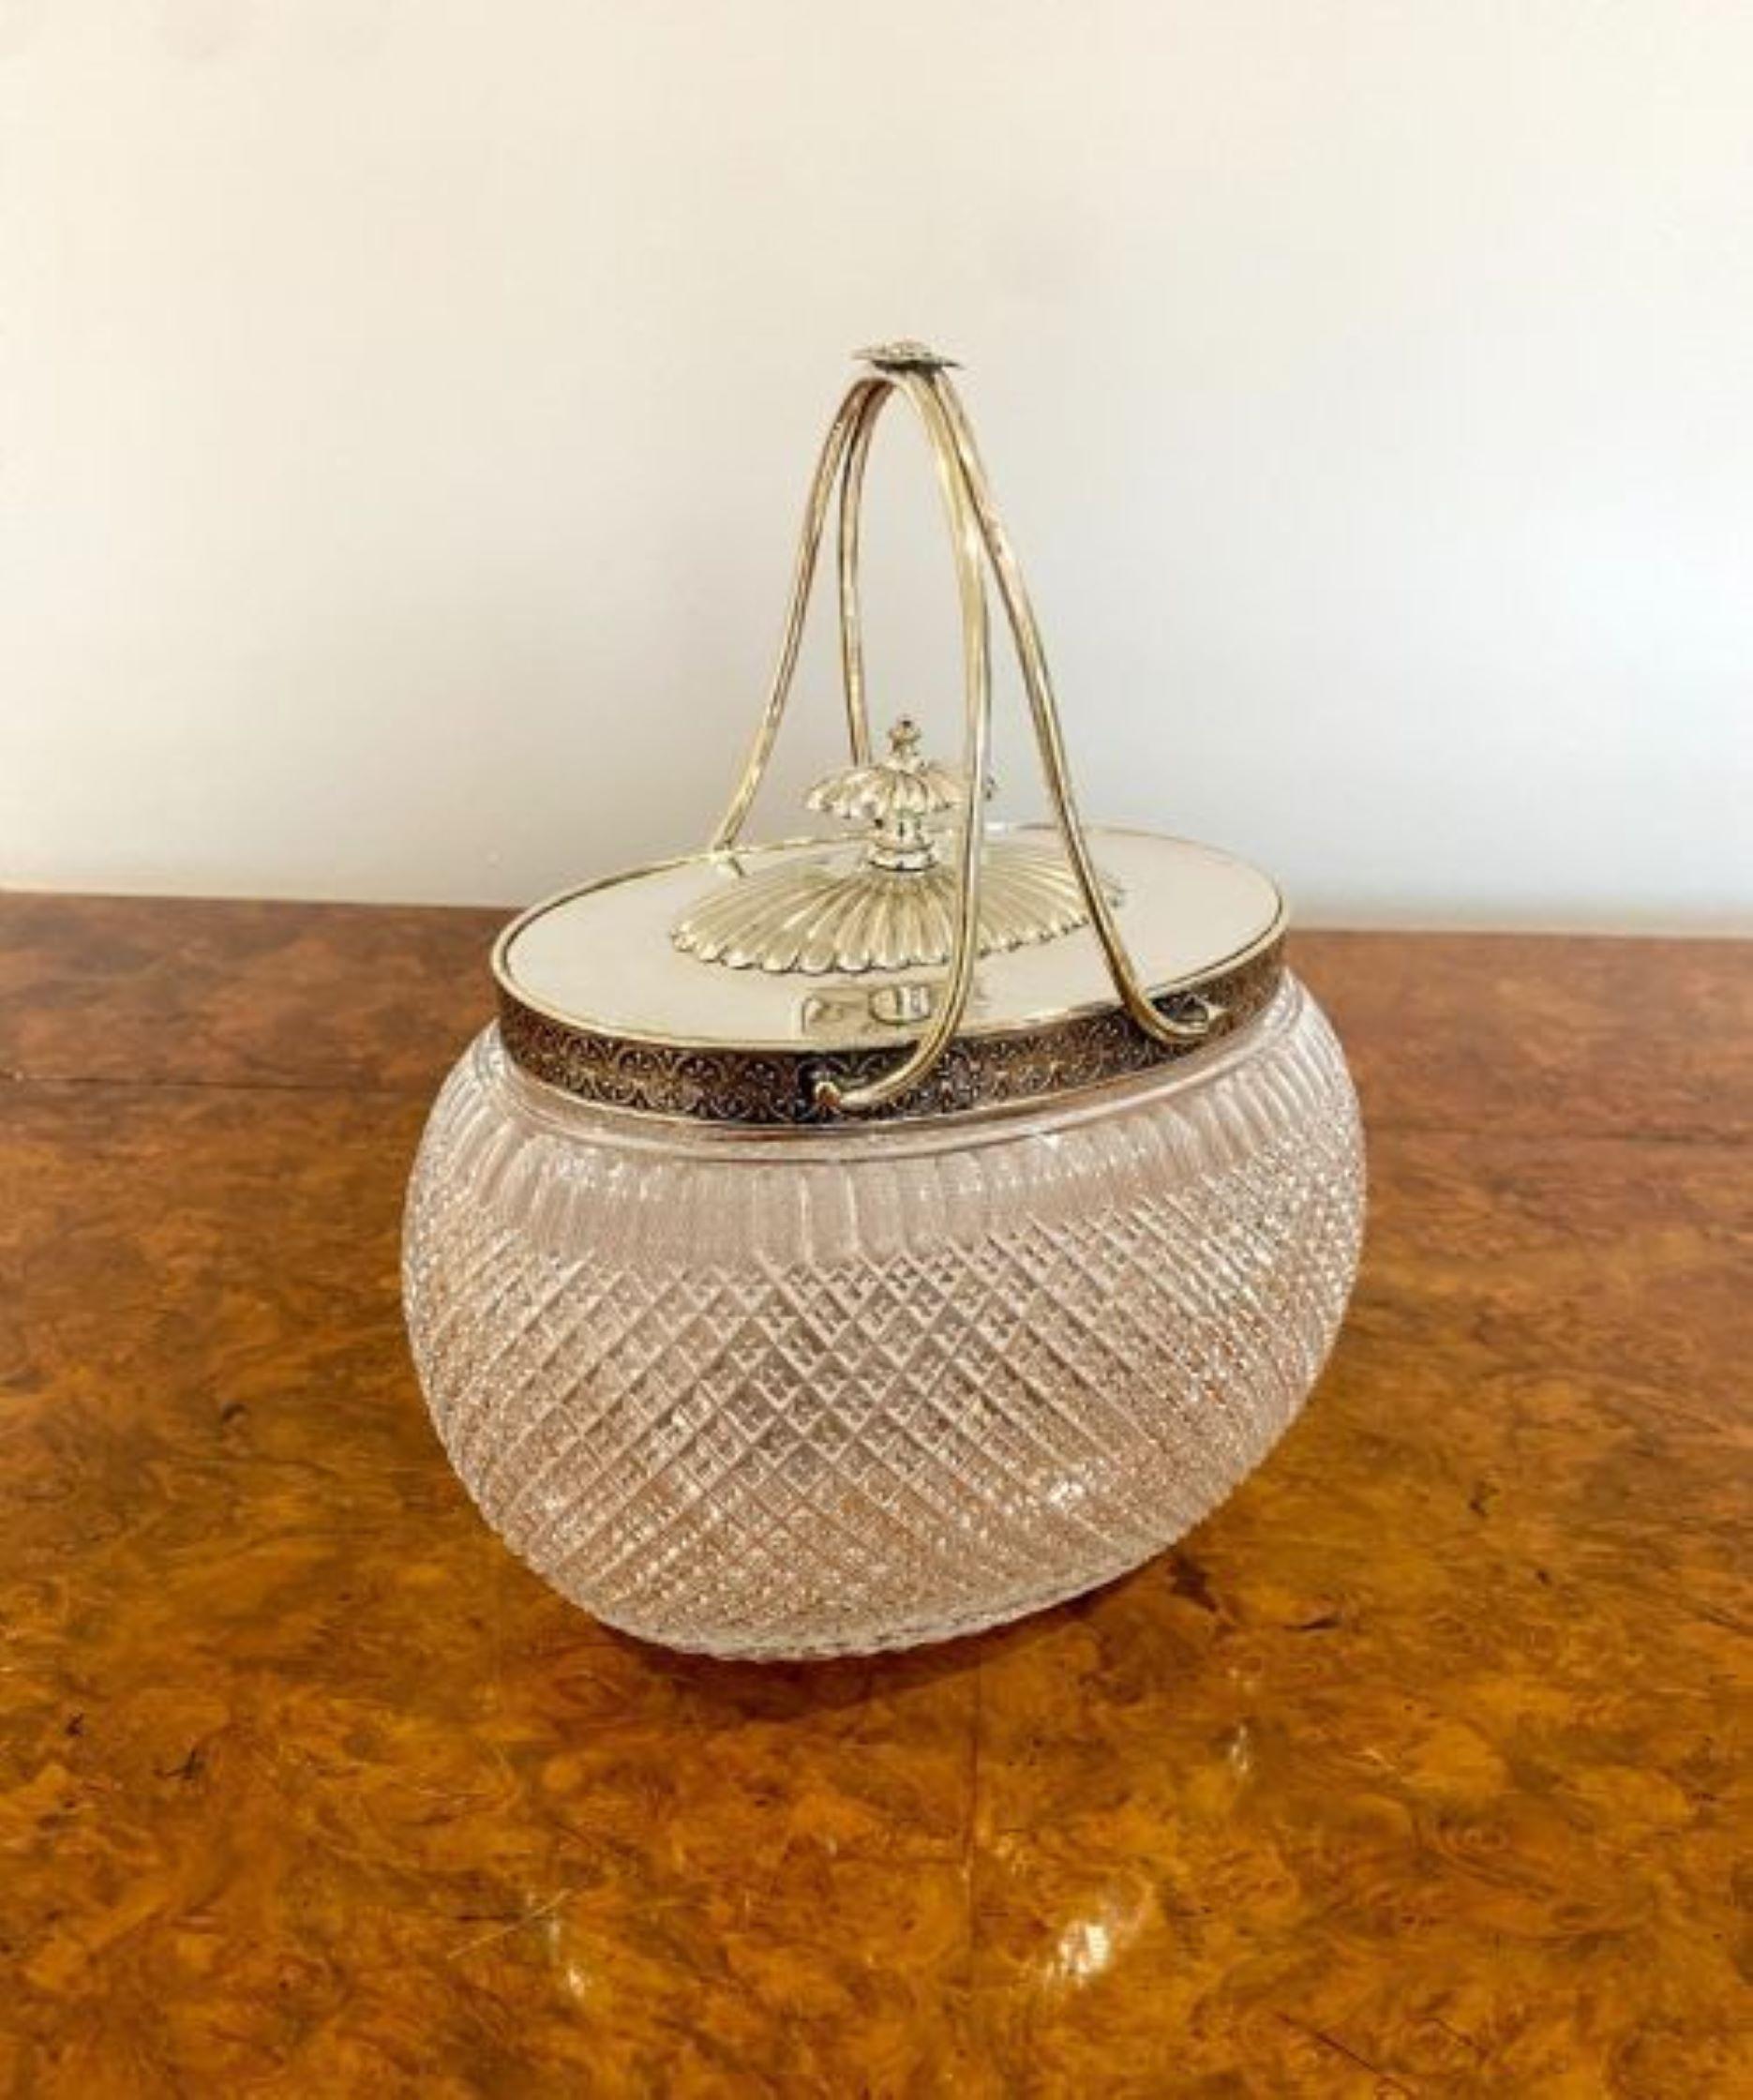 Fantastic quality antique Victorian cut glass & silver plated biscuit barrel, having a fantastic quality cut glass shaped biscuit barrel with a ornate silver plated lift off lid. 